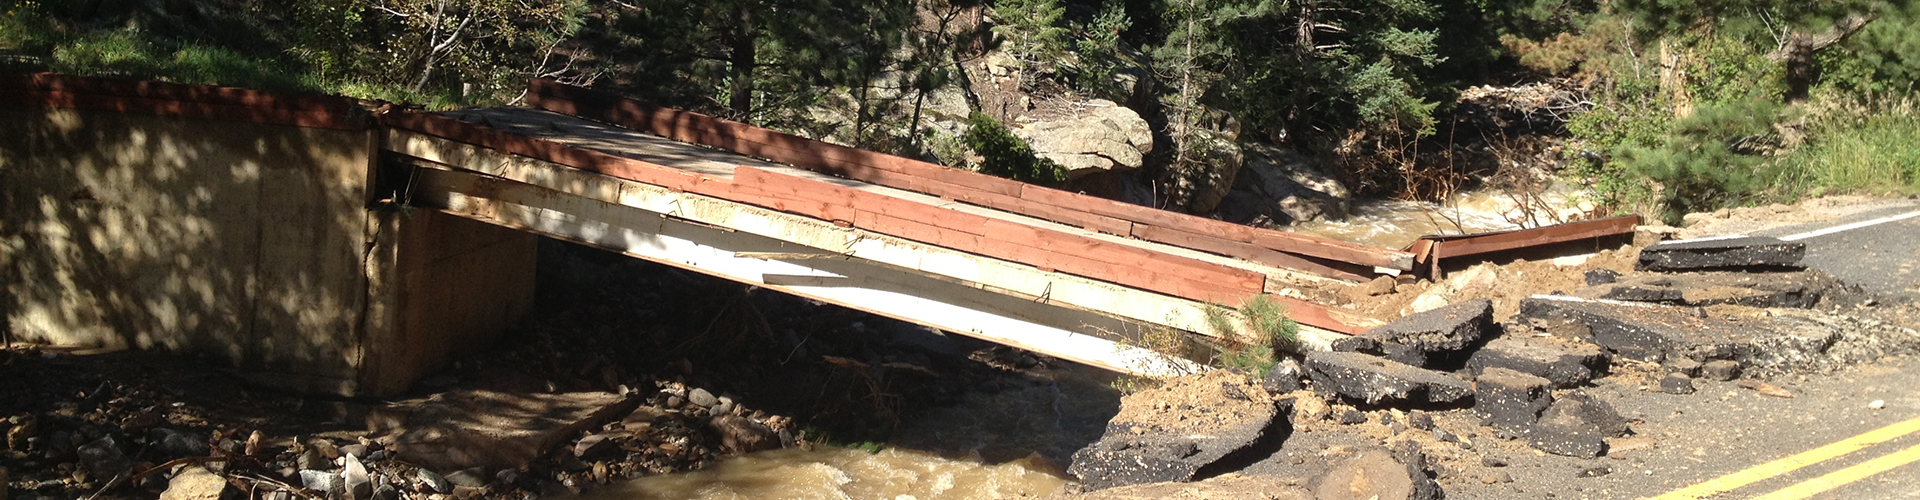 Private bridge destroyed in the 2013 Flood